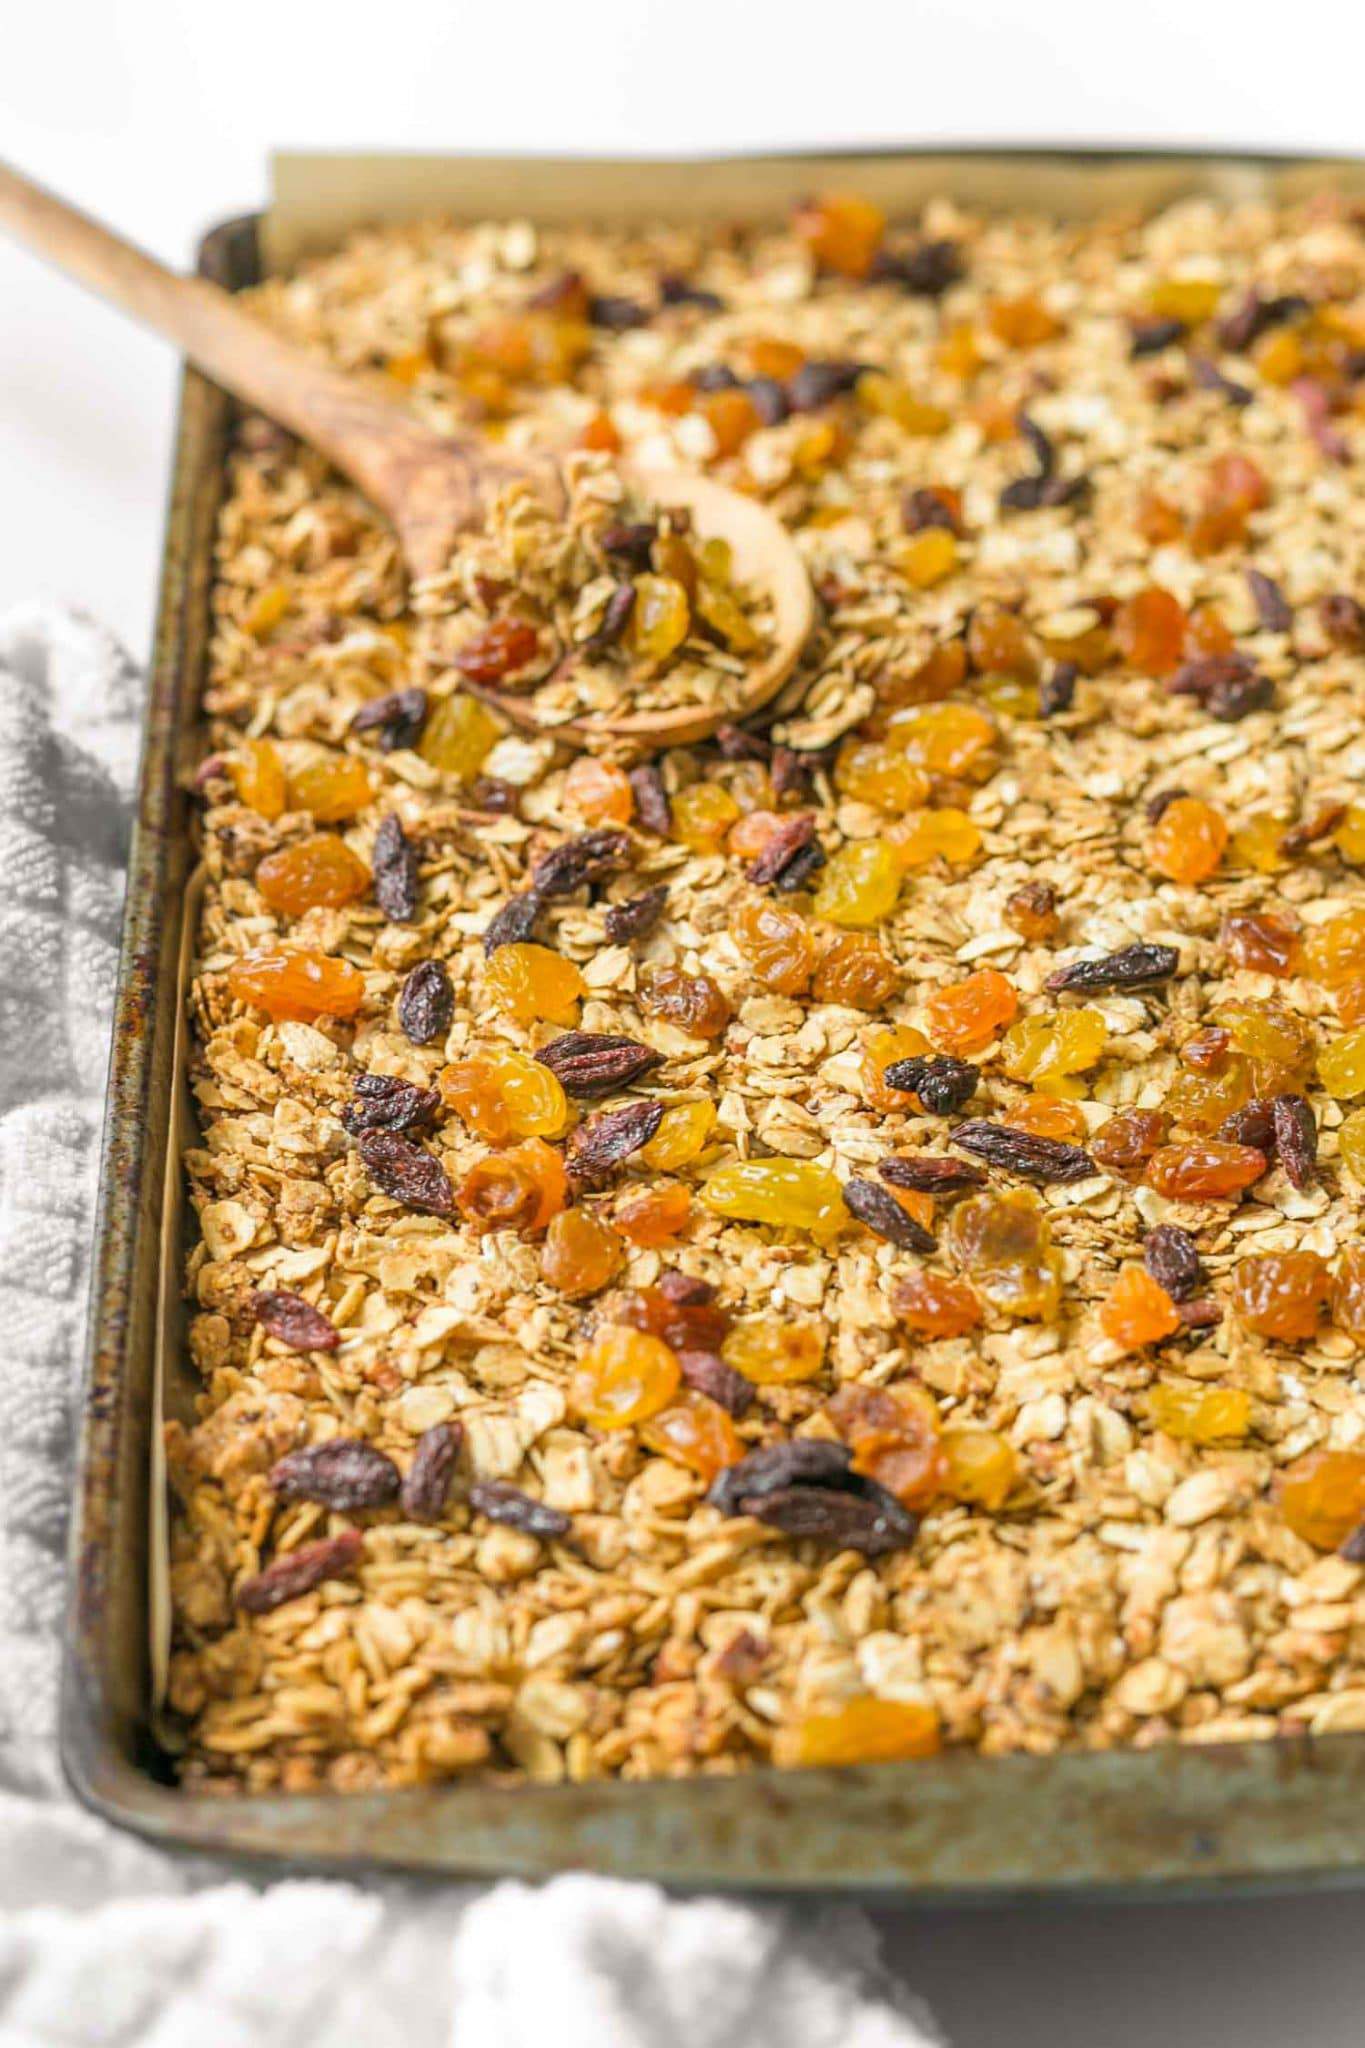 Baking tray with vegan homeamde granola with a large wooden spoon on a white surface 